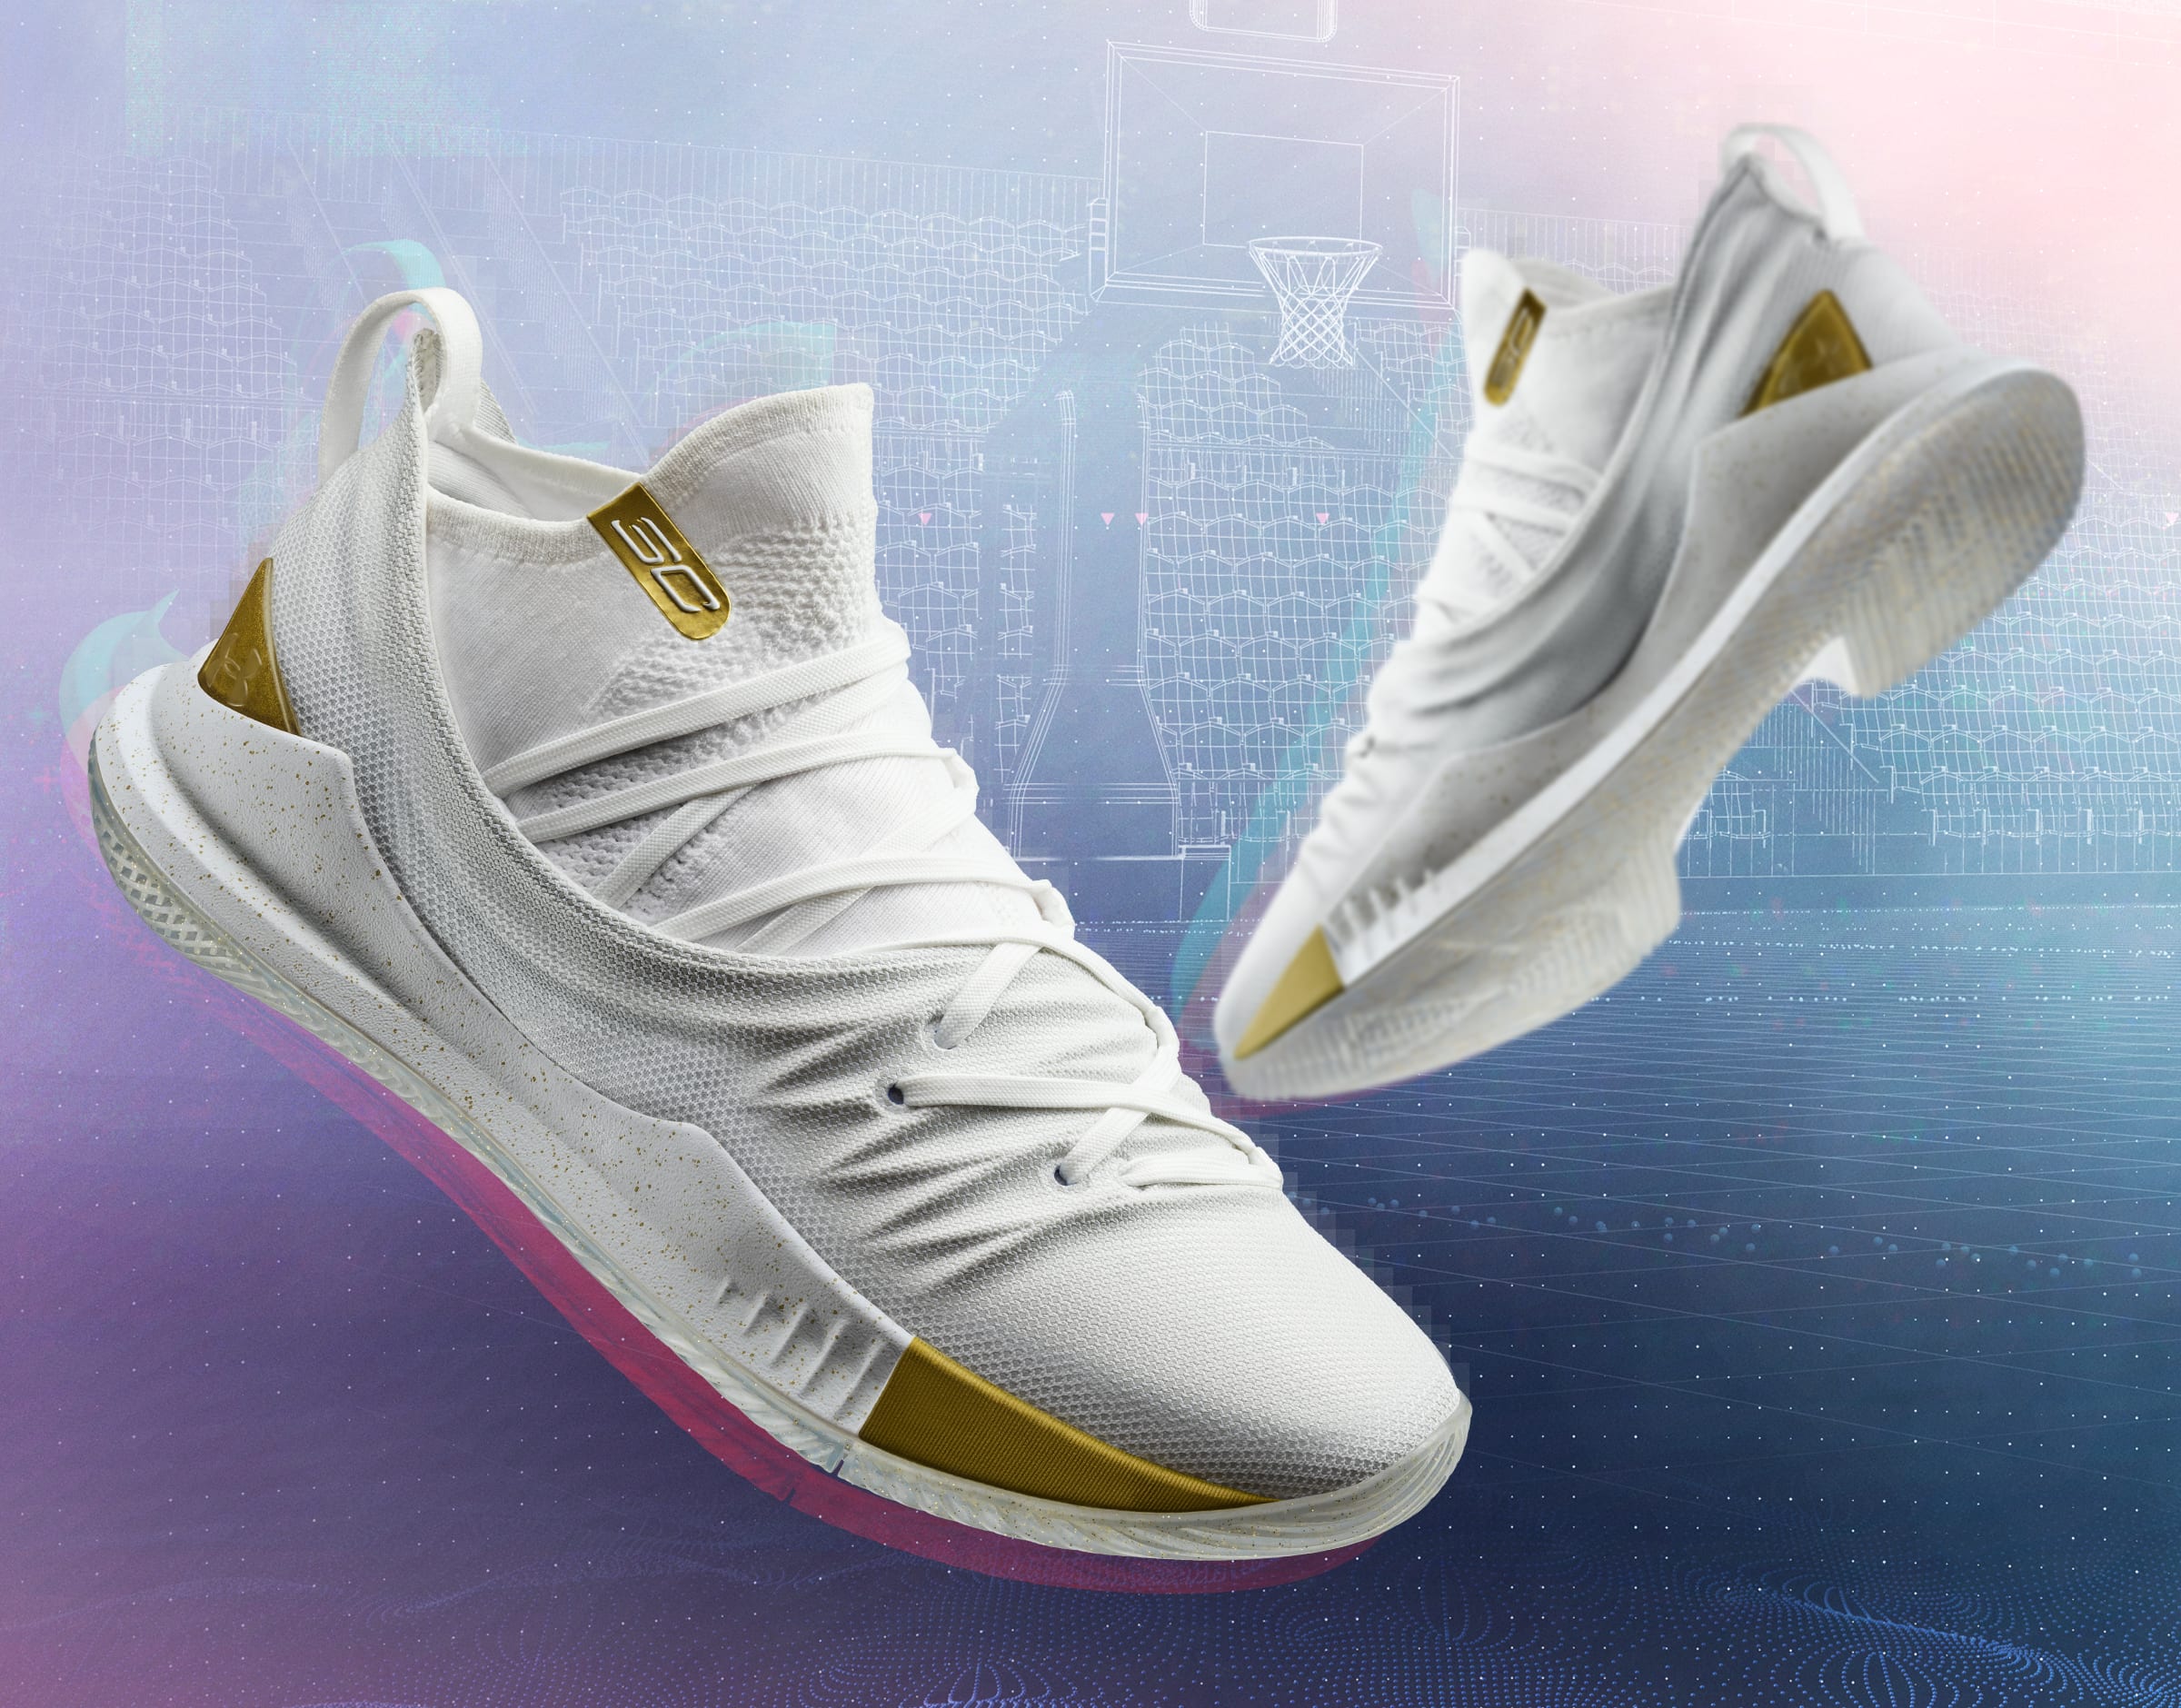 Under Armour Curry 5 'Takeover Edition' Release Date | Sole Collector